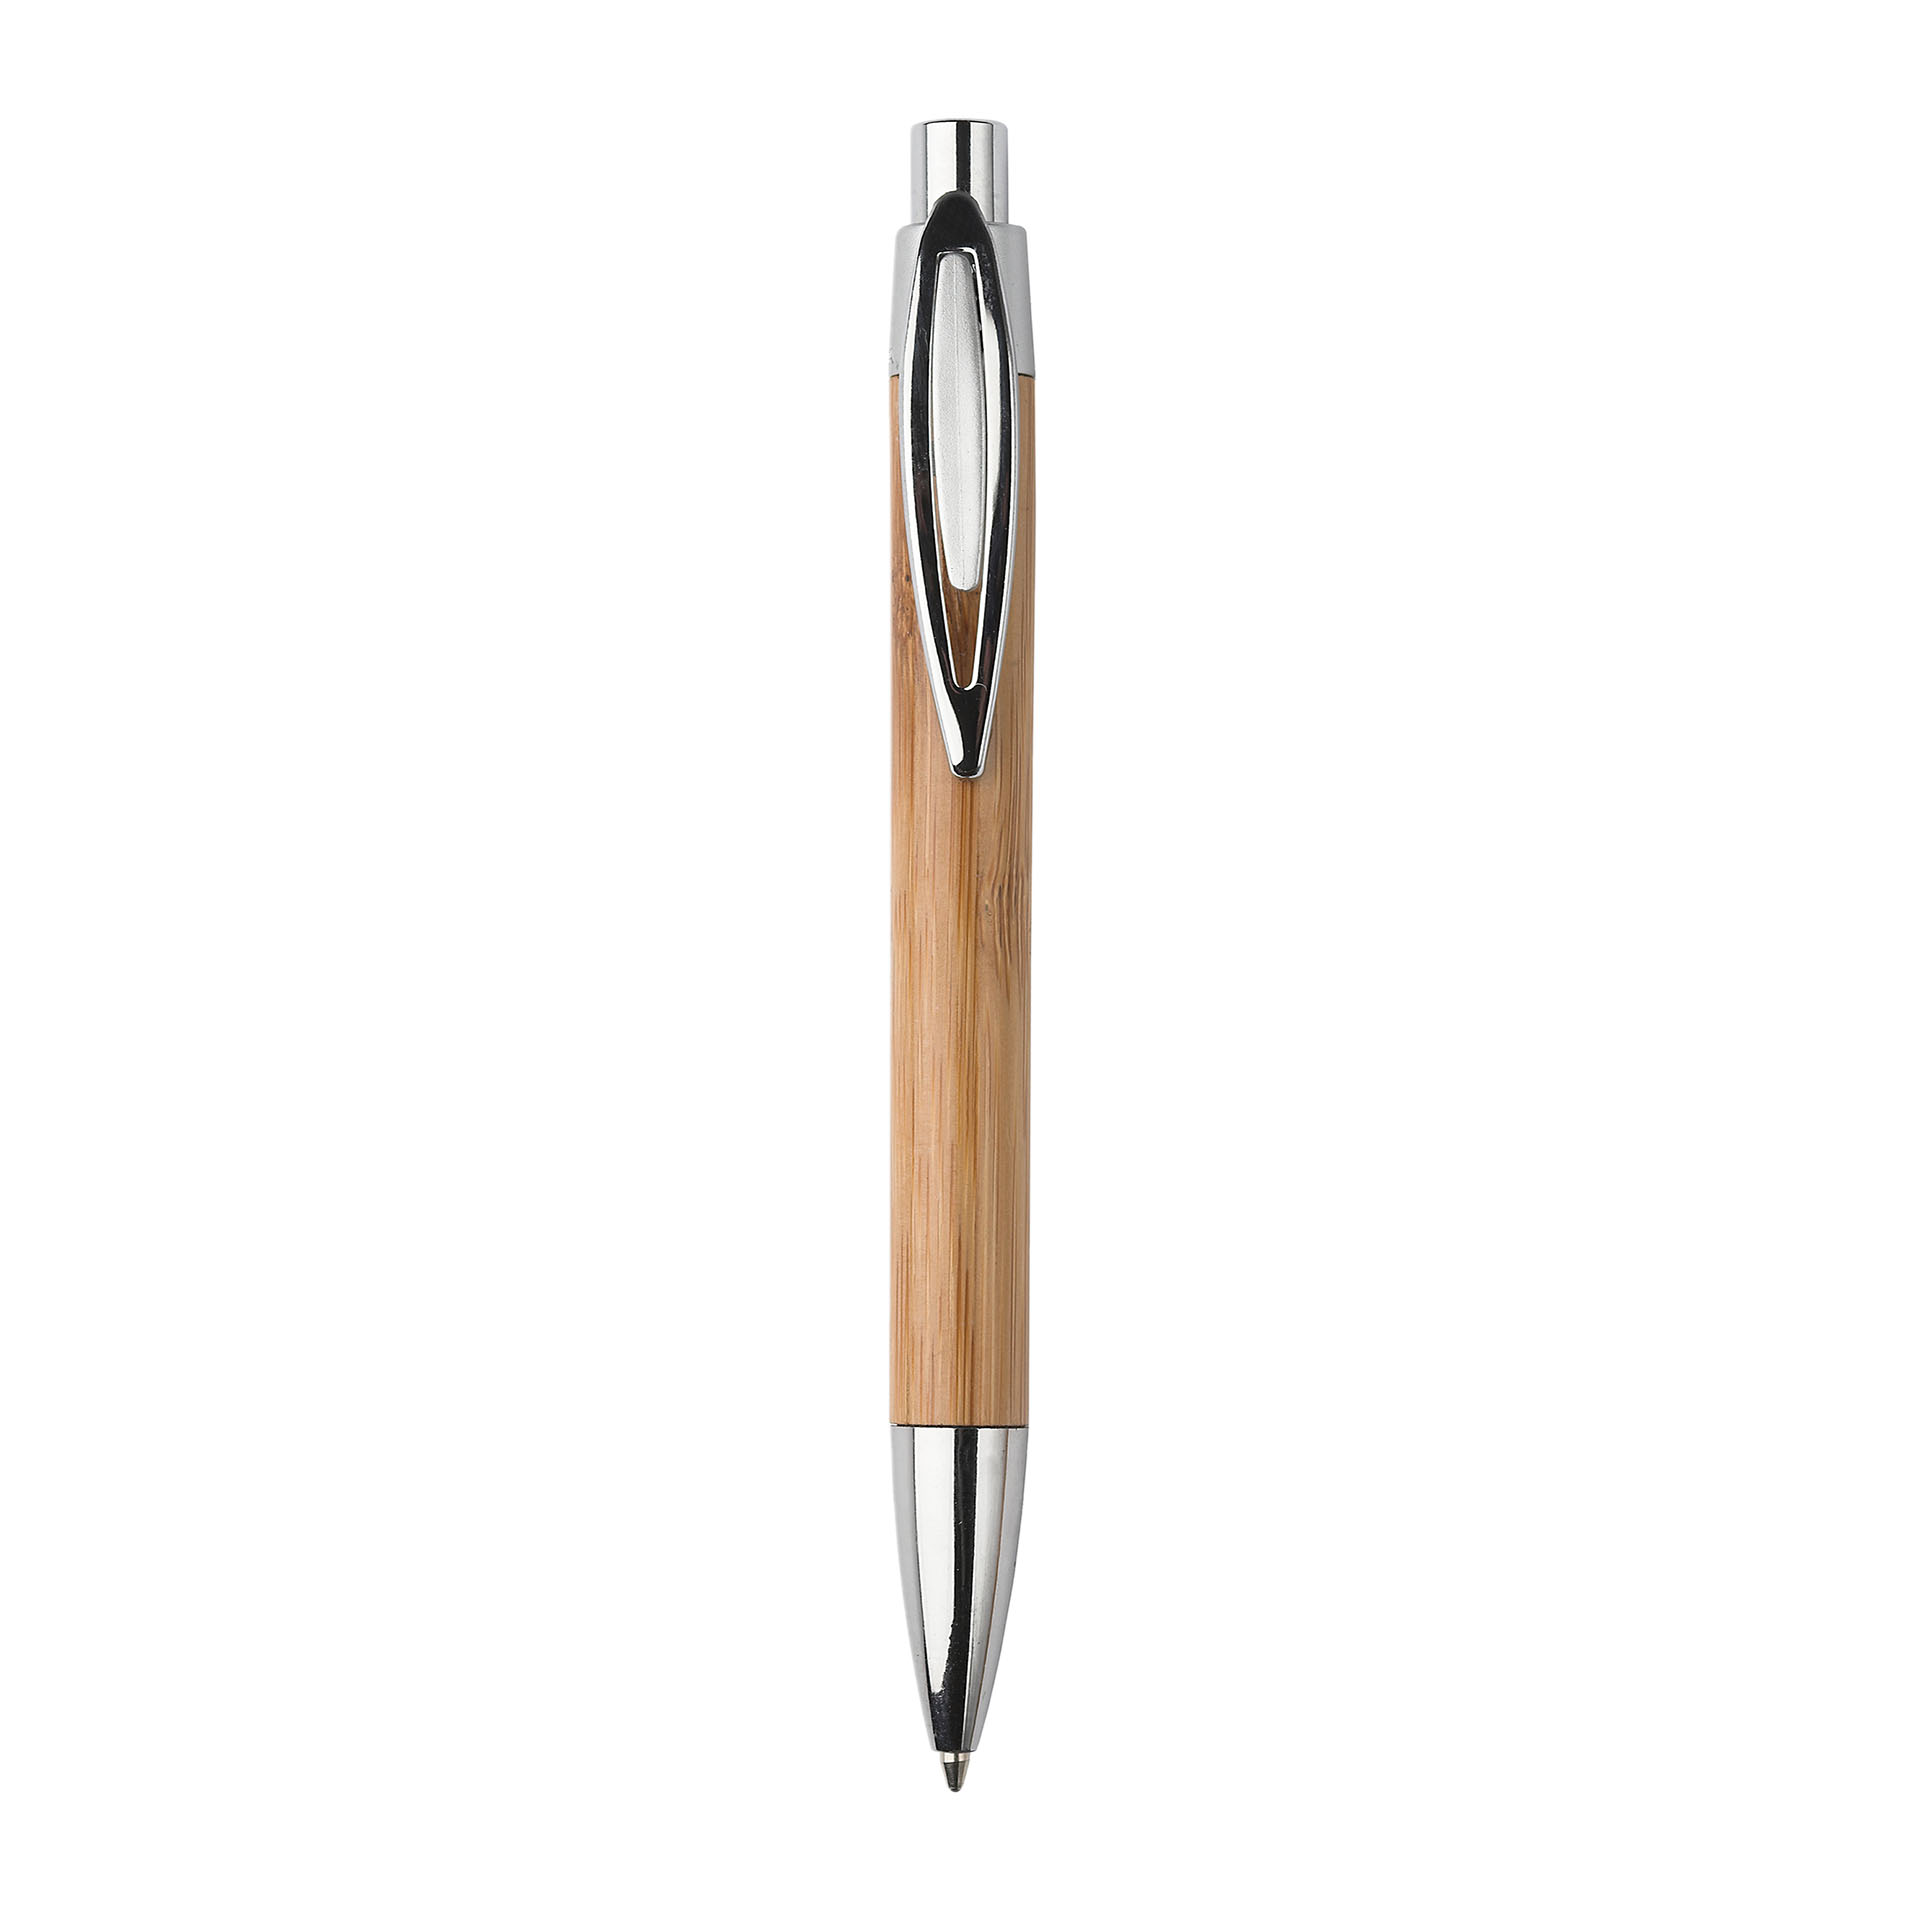 The Green & Good Rio Pen made from sustainable bamboo. Comes with a chrome tip, clip and push button. Black ink as standard.